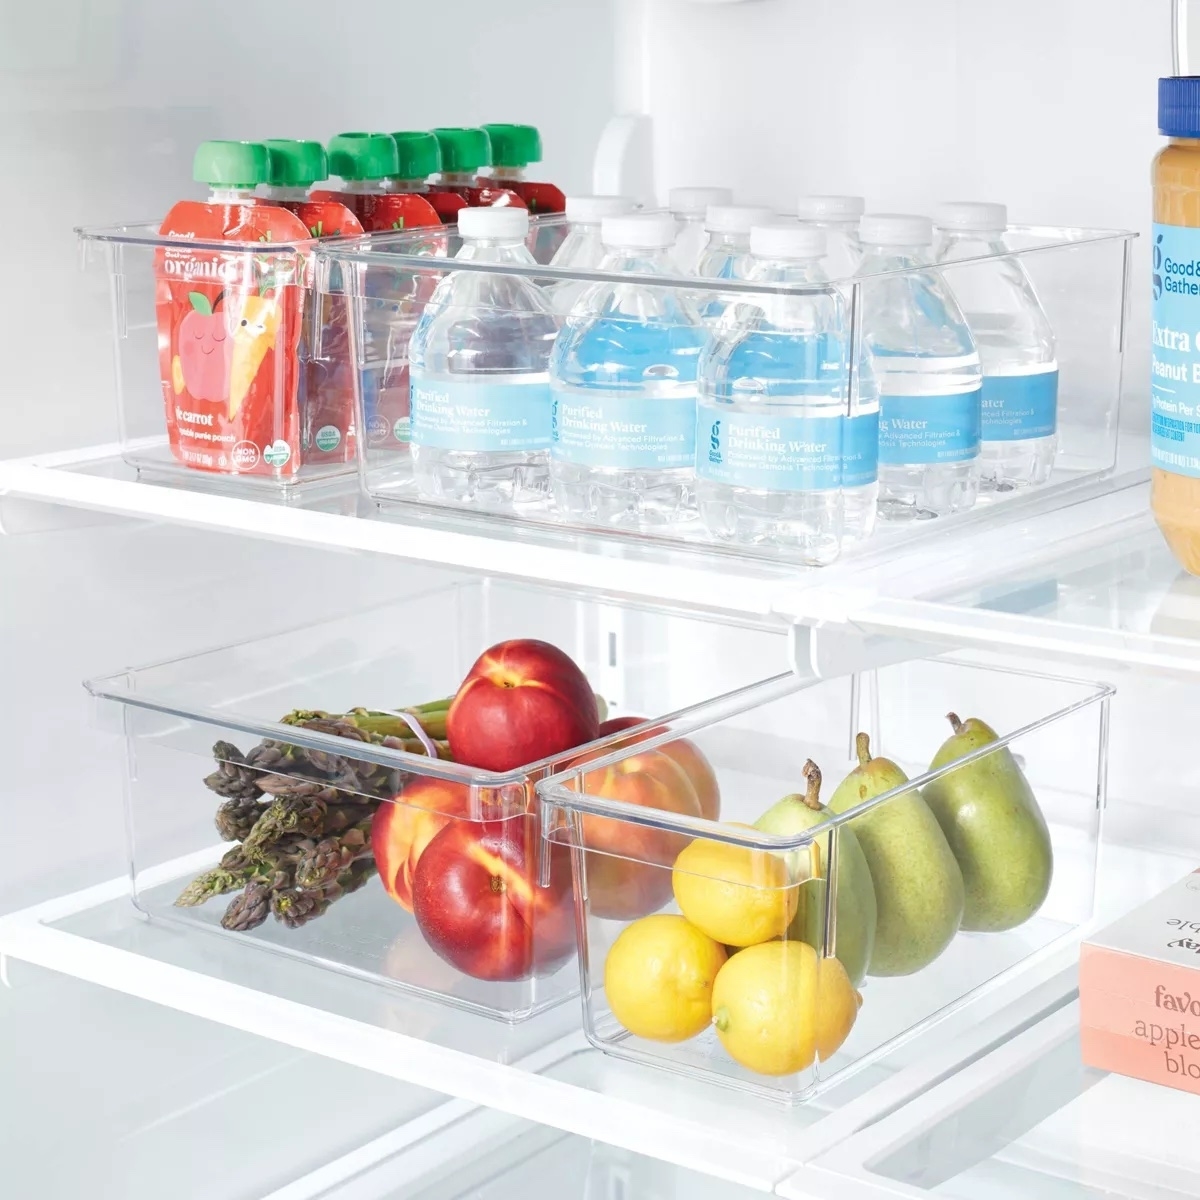 Clear fridge organizer bins containing fruit and beverages for efficient space management